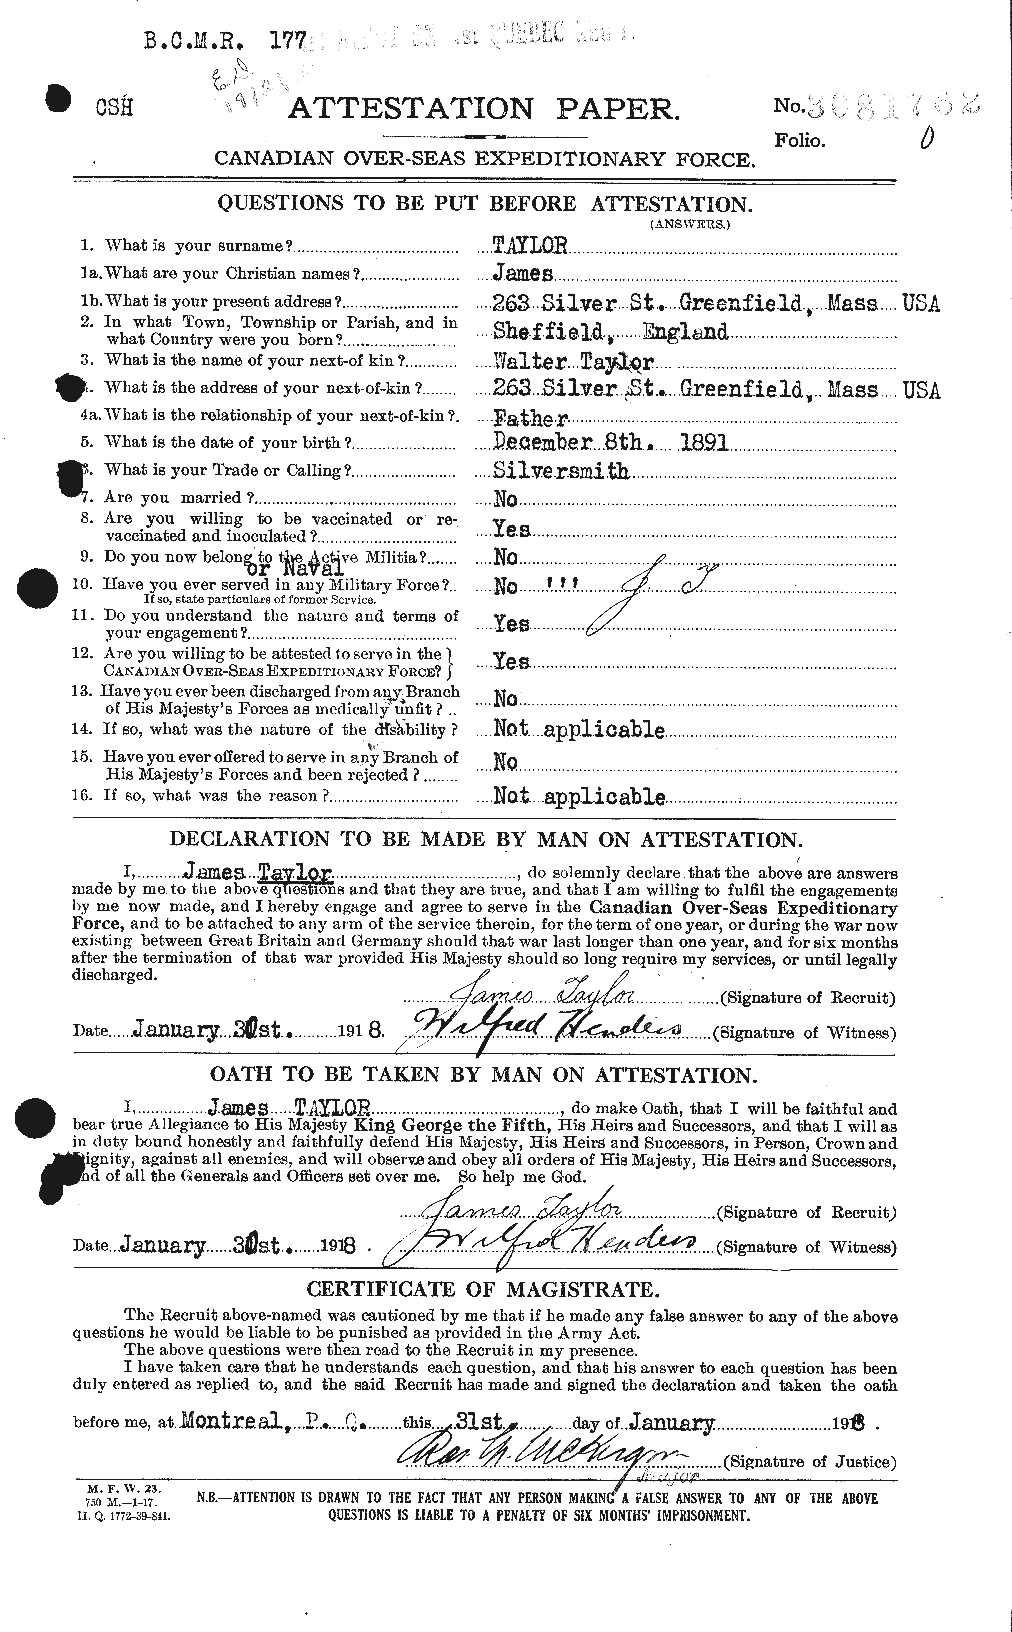 Personnel Records of the First World War - CEF 626669a